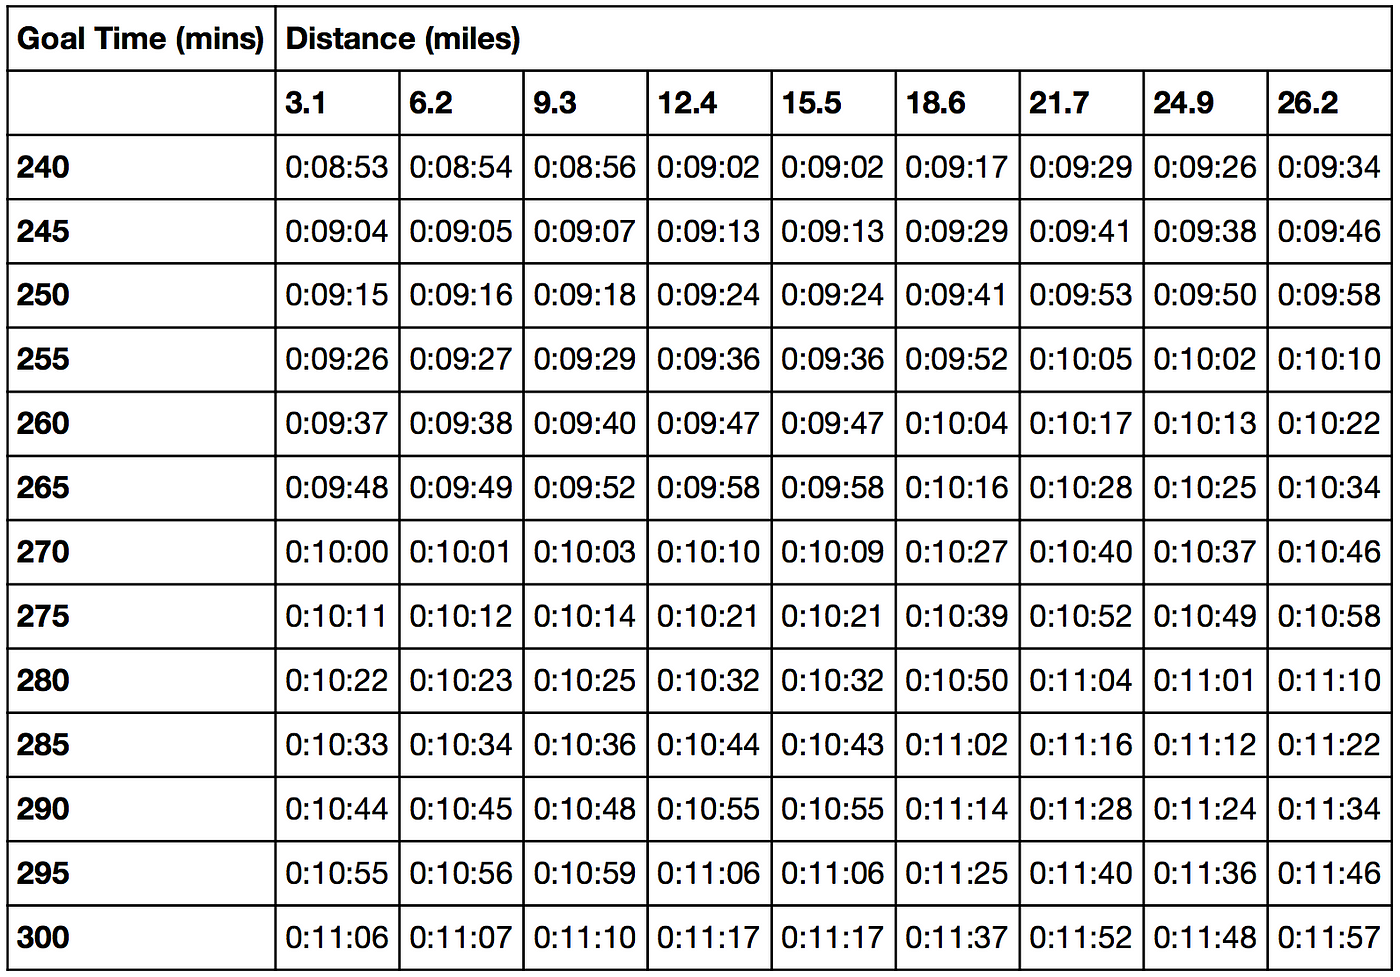 How to Pace like an Elite in Boston, by barrysmyth, Running with Data